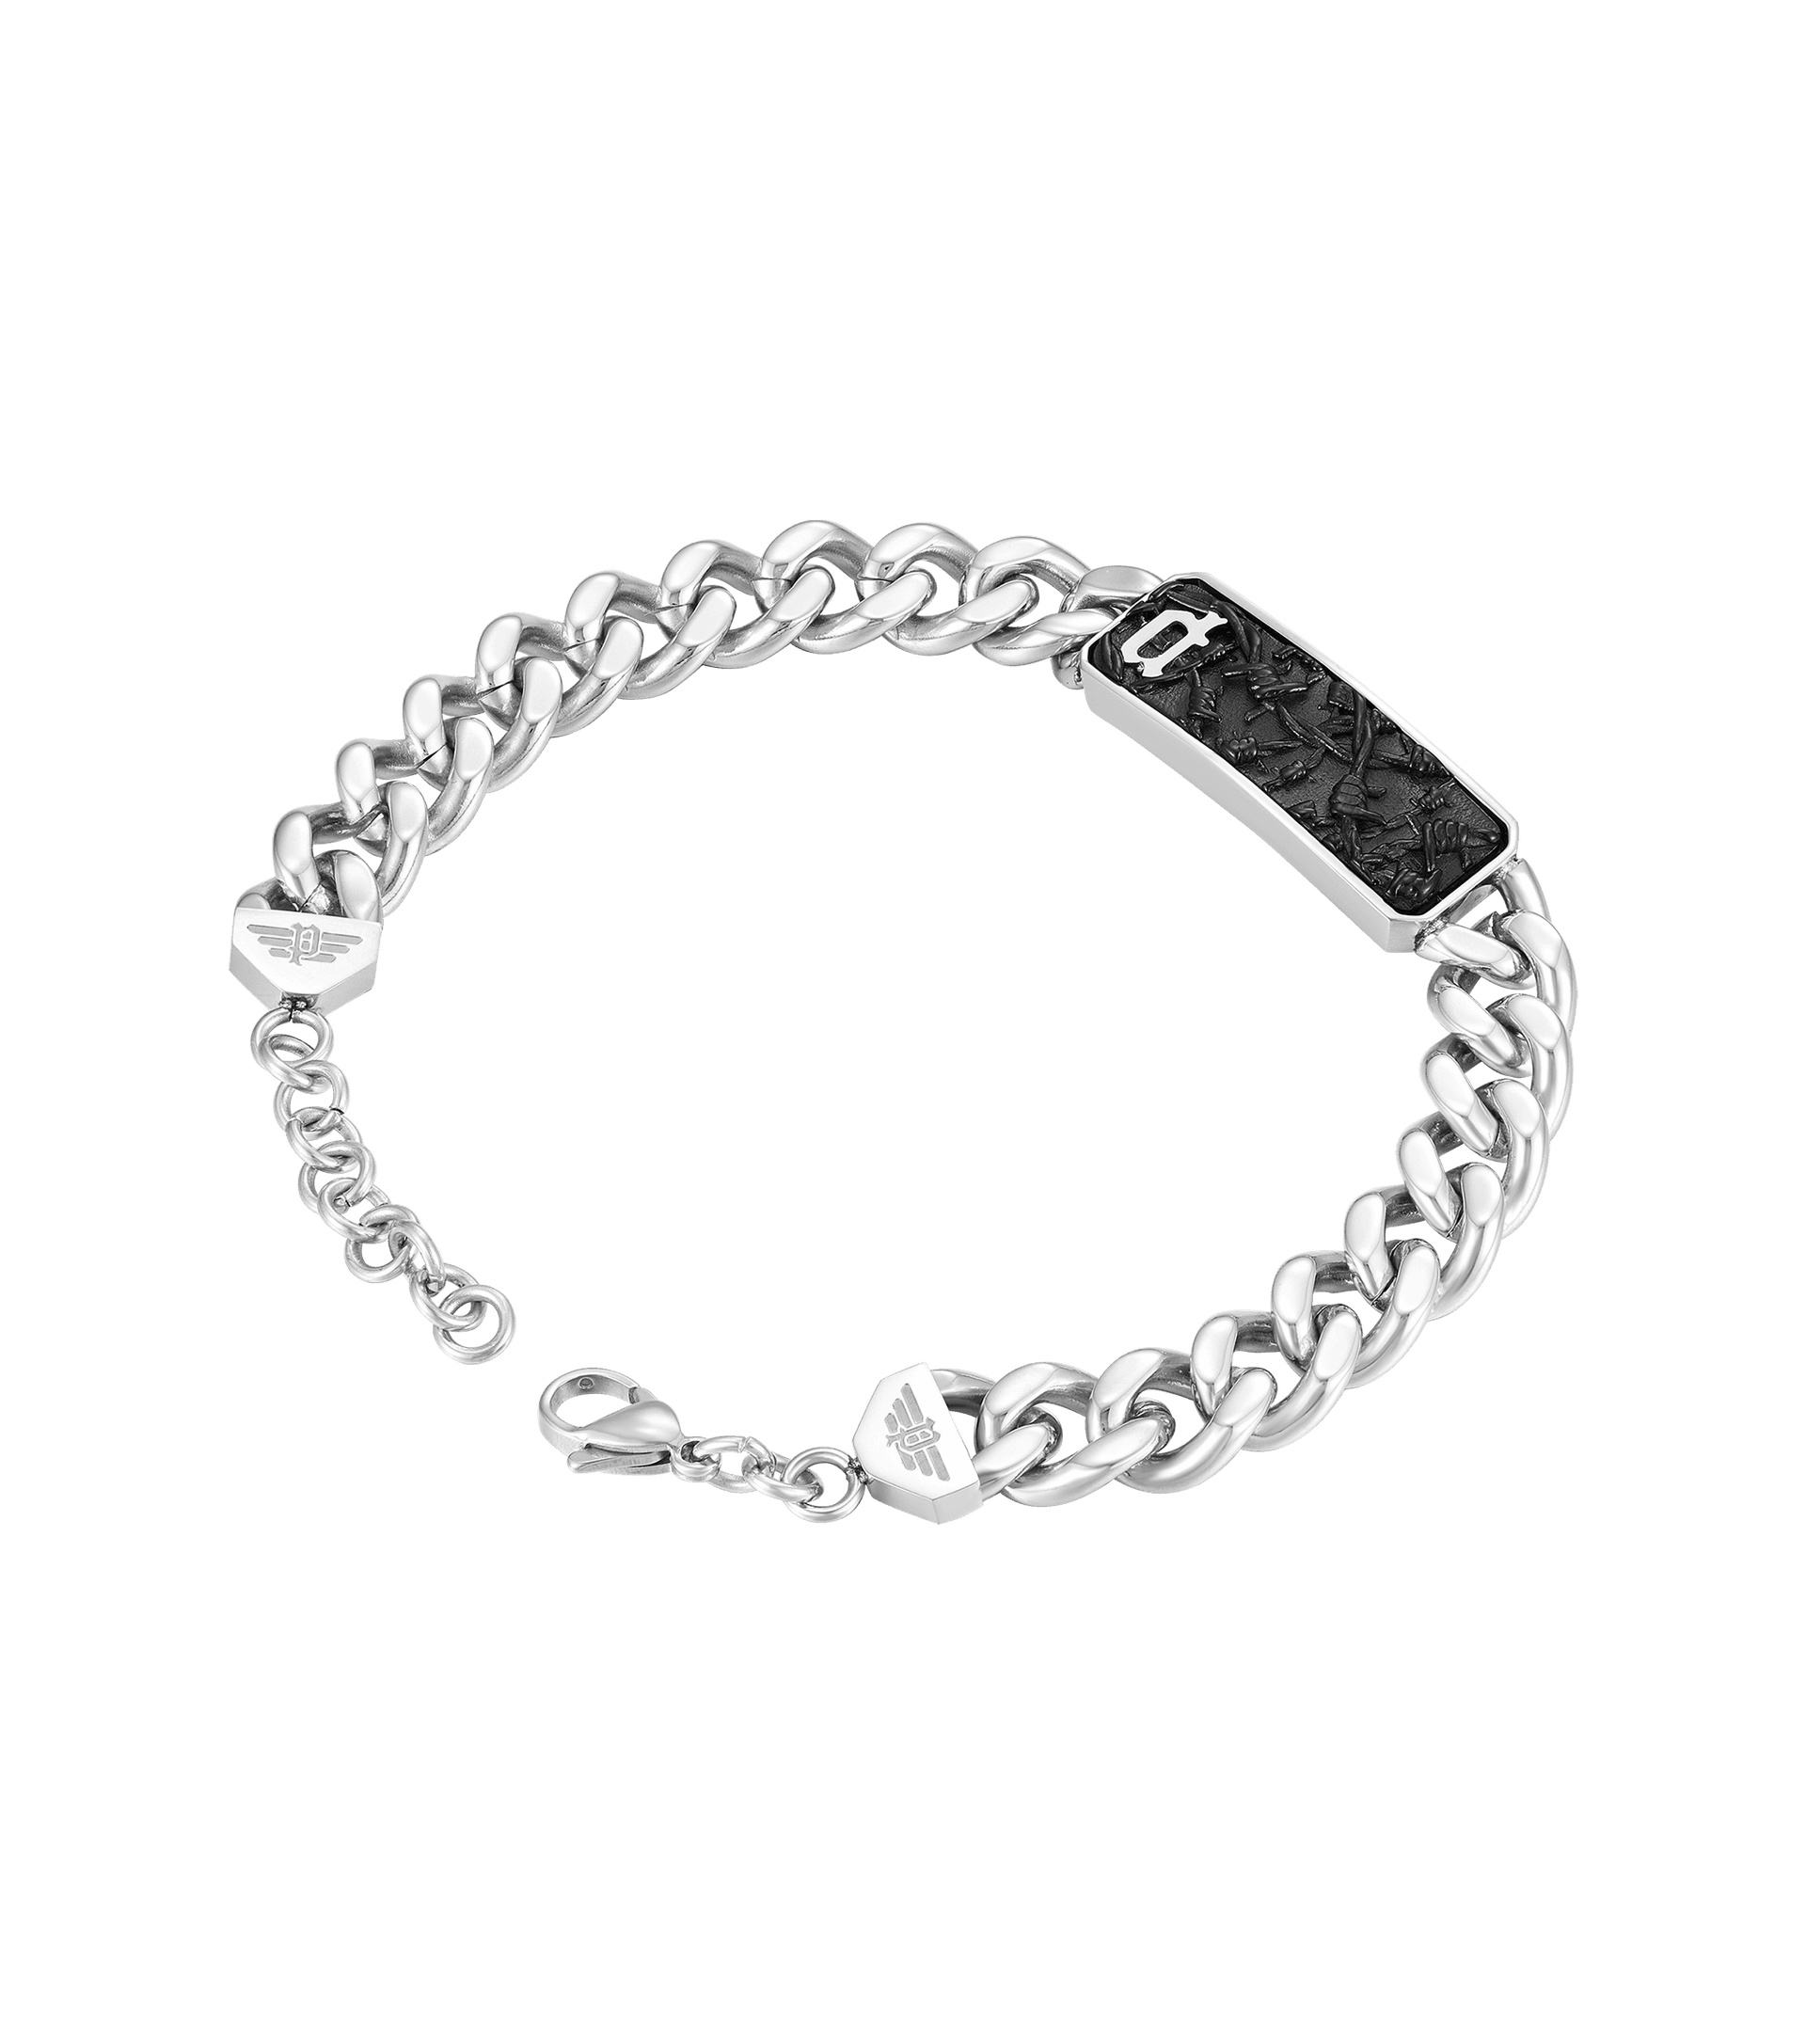 [Teures Material] Police jewels - Wire PEAGB0033801 Armband für Herren Police